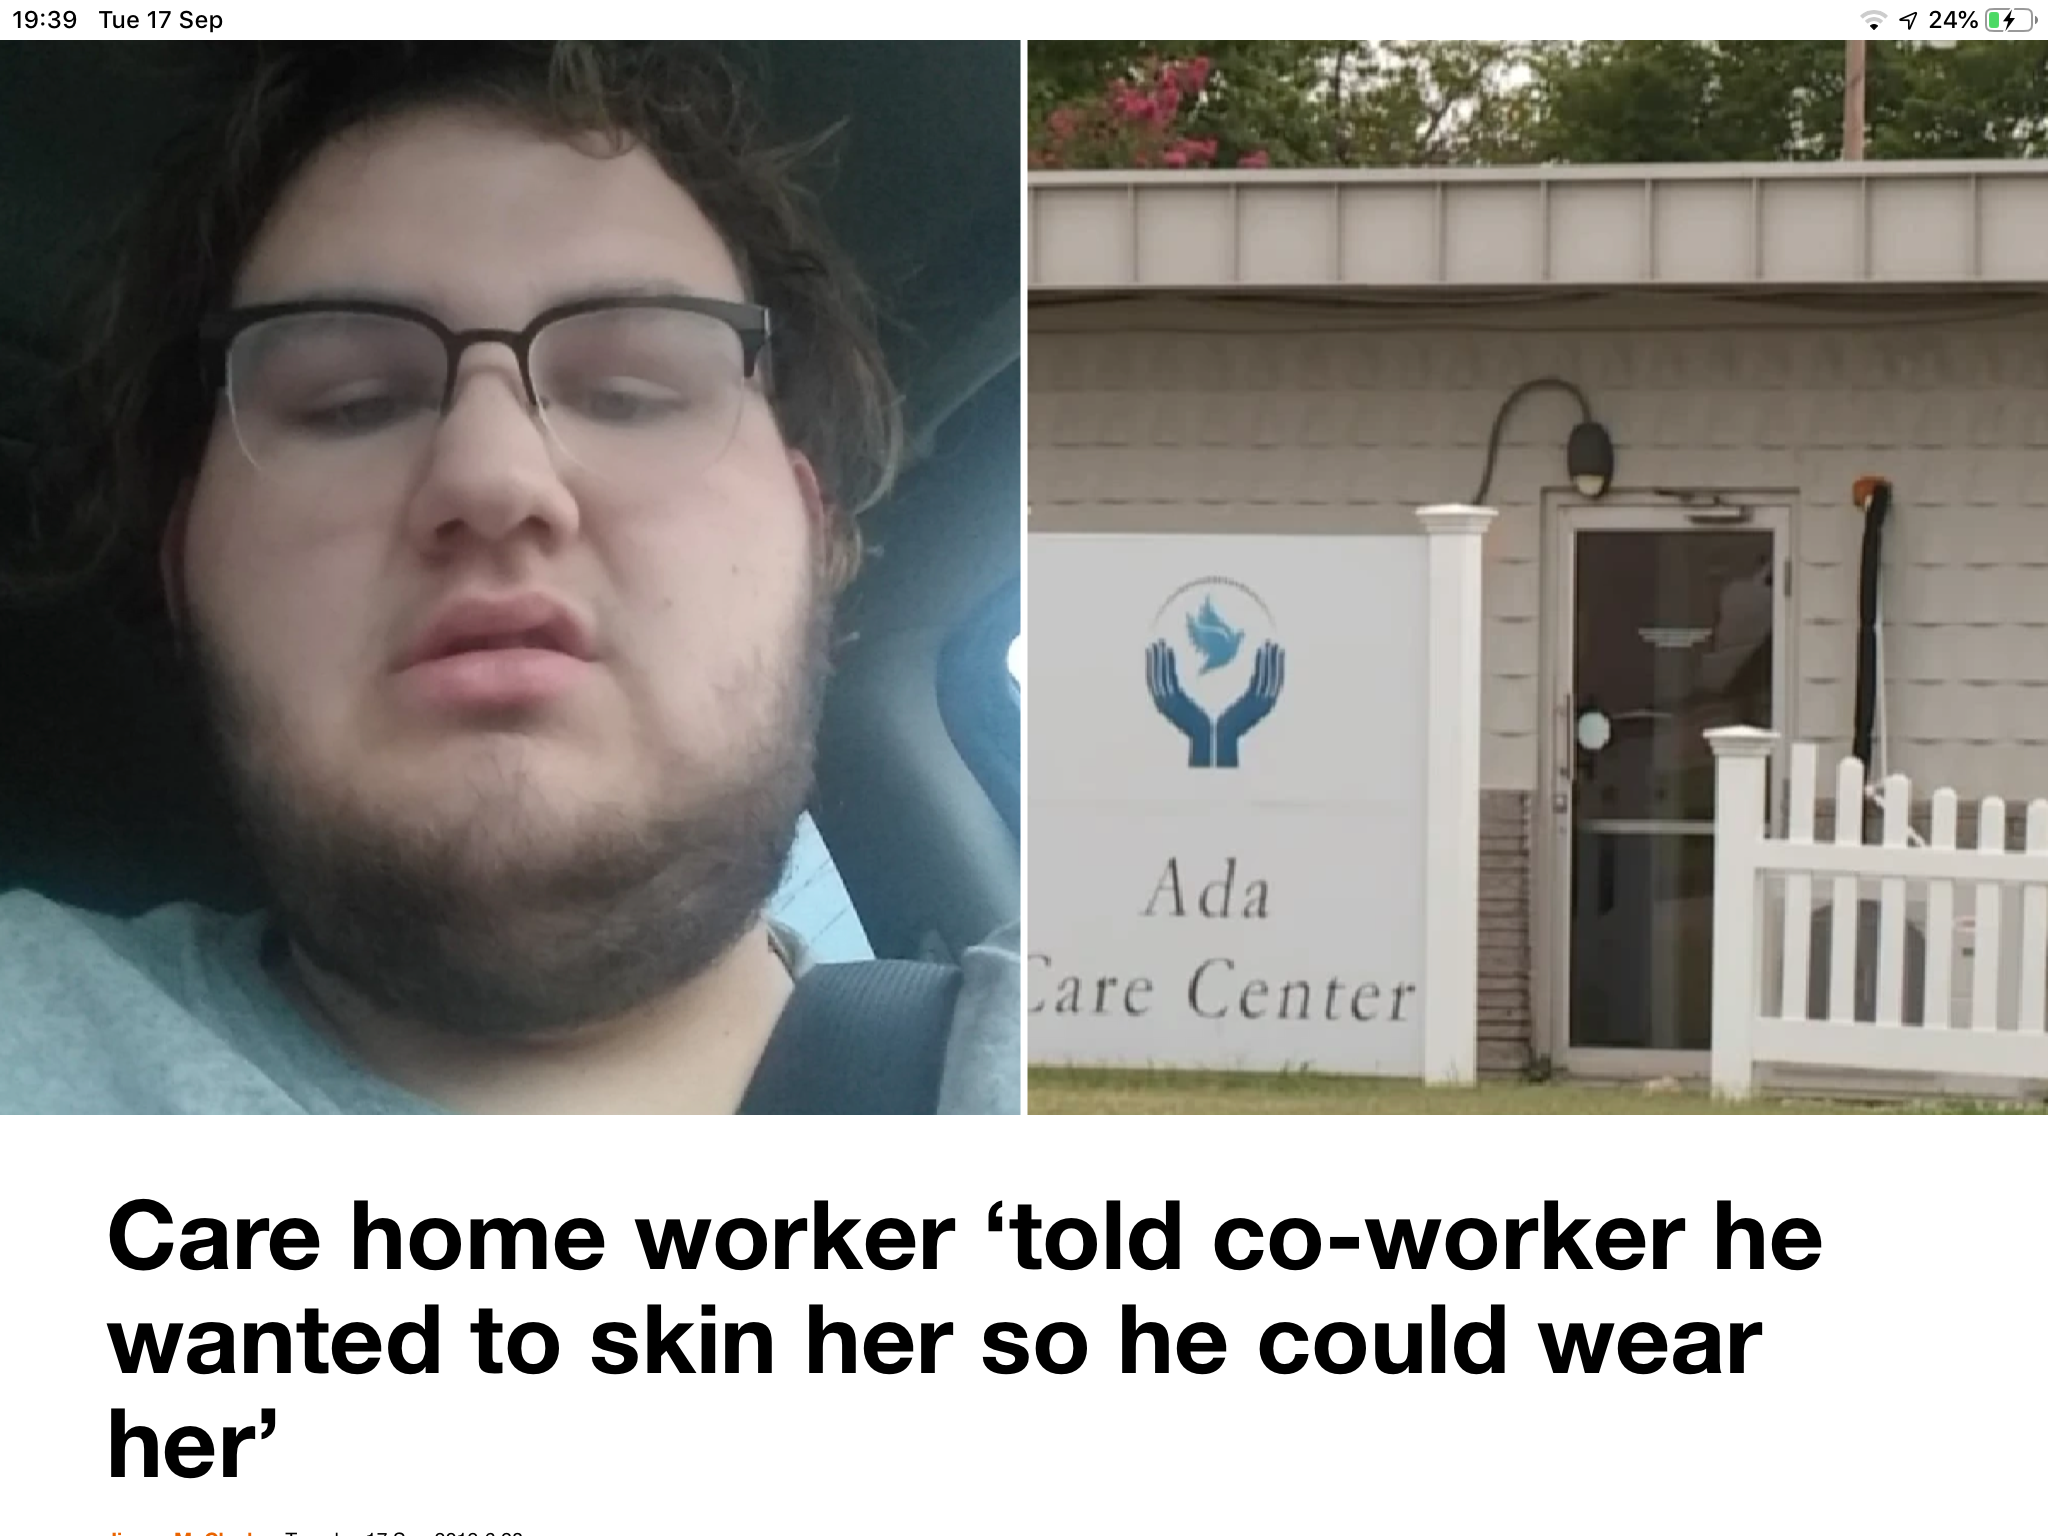 glasses - Tue 17 Sep 24% Ada Care Center Care home worker 'told coworker he wanted to skin her so he could wear her